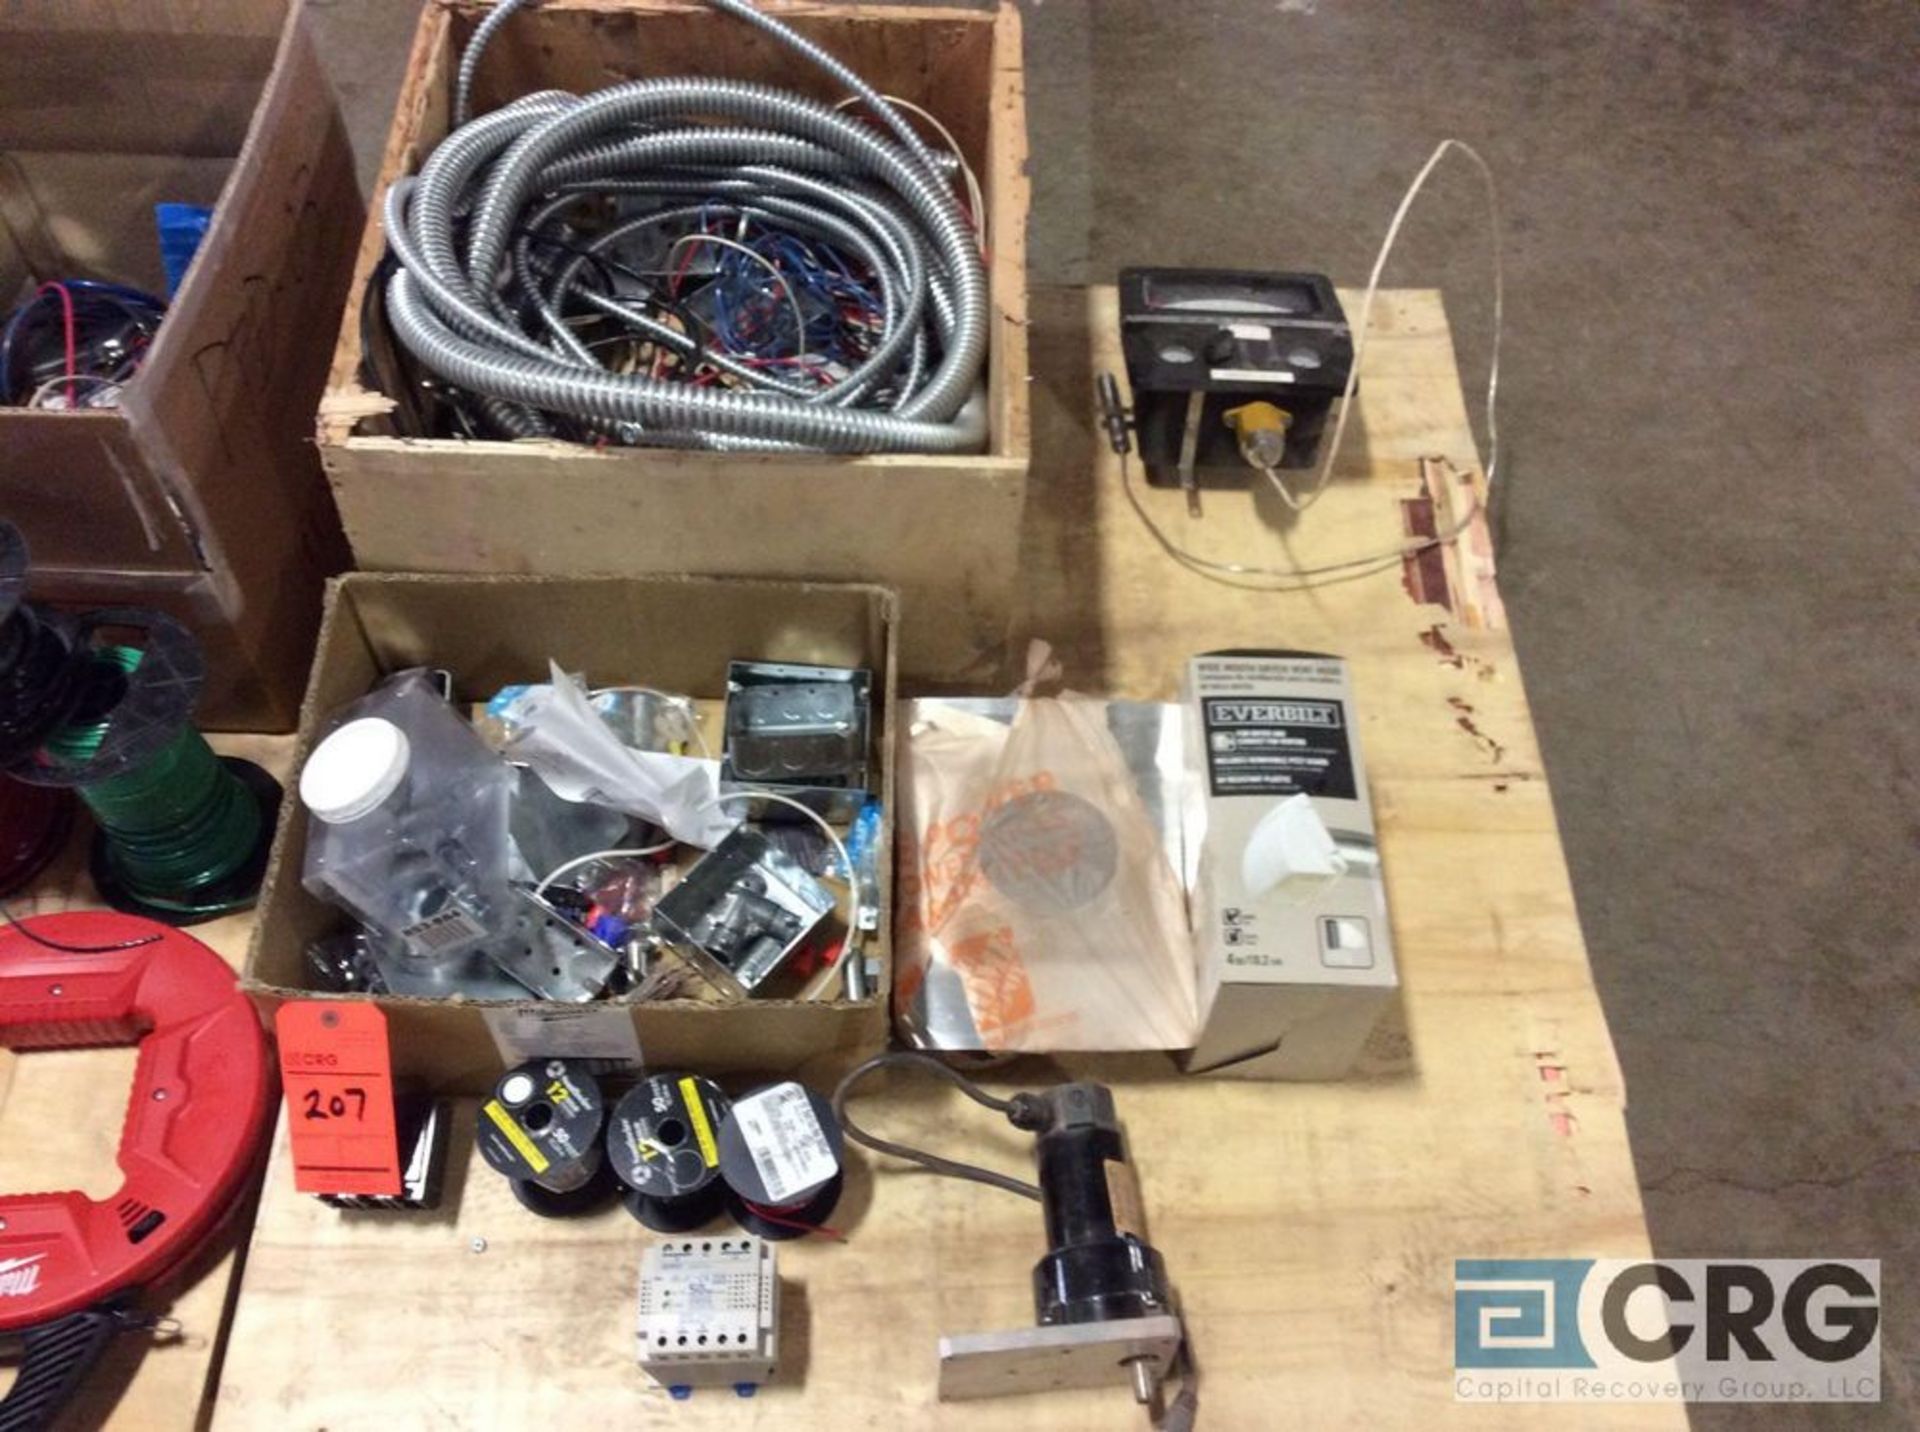 Lot of asst electrical supplies including spool wire, fish tape, bender, plugs, flex tube and boxes. - Image 3 of 3